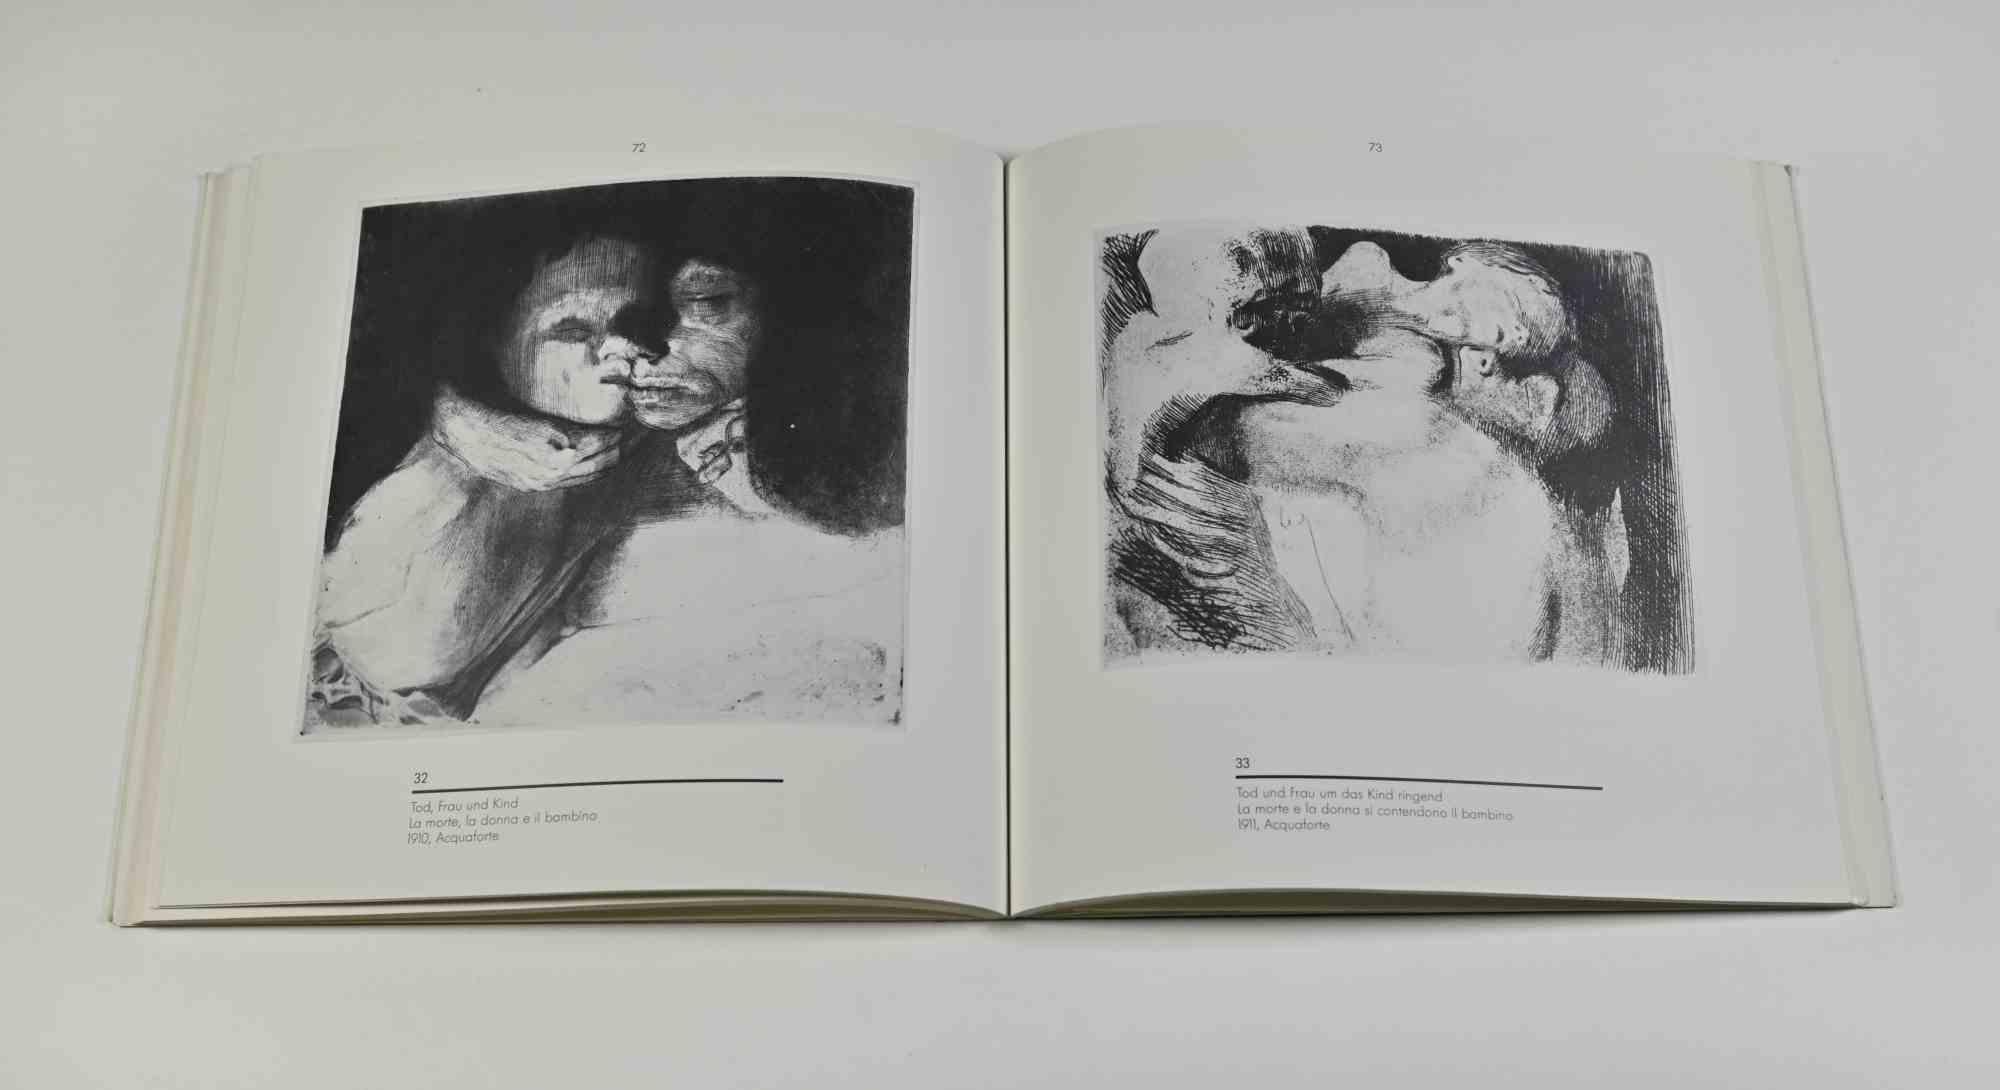 Kather Kollwitz, graphics, drawings and sculptures is a catalogue realized by Institut fur Auslandsbeziehungen Stuttgart, in the 1950s. 

Illustrated catalogue, 20 x 20 cm. 

Good conditions!